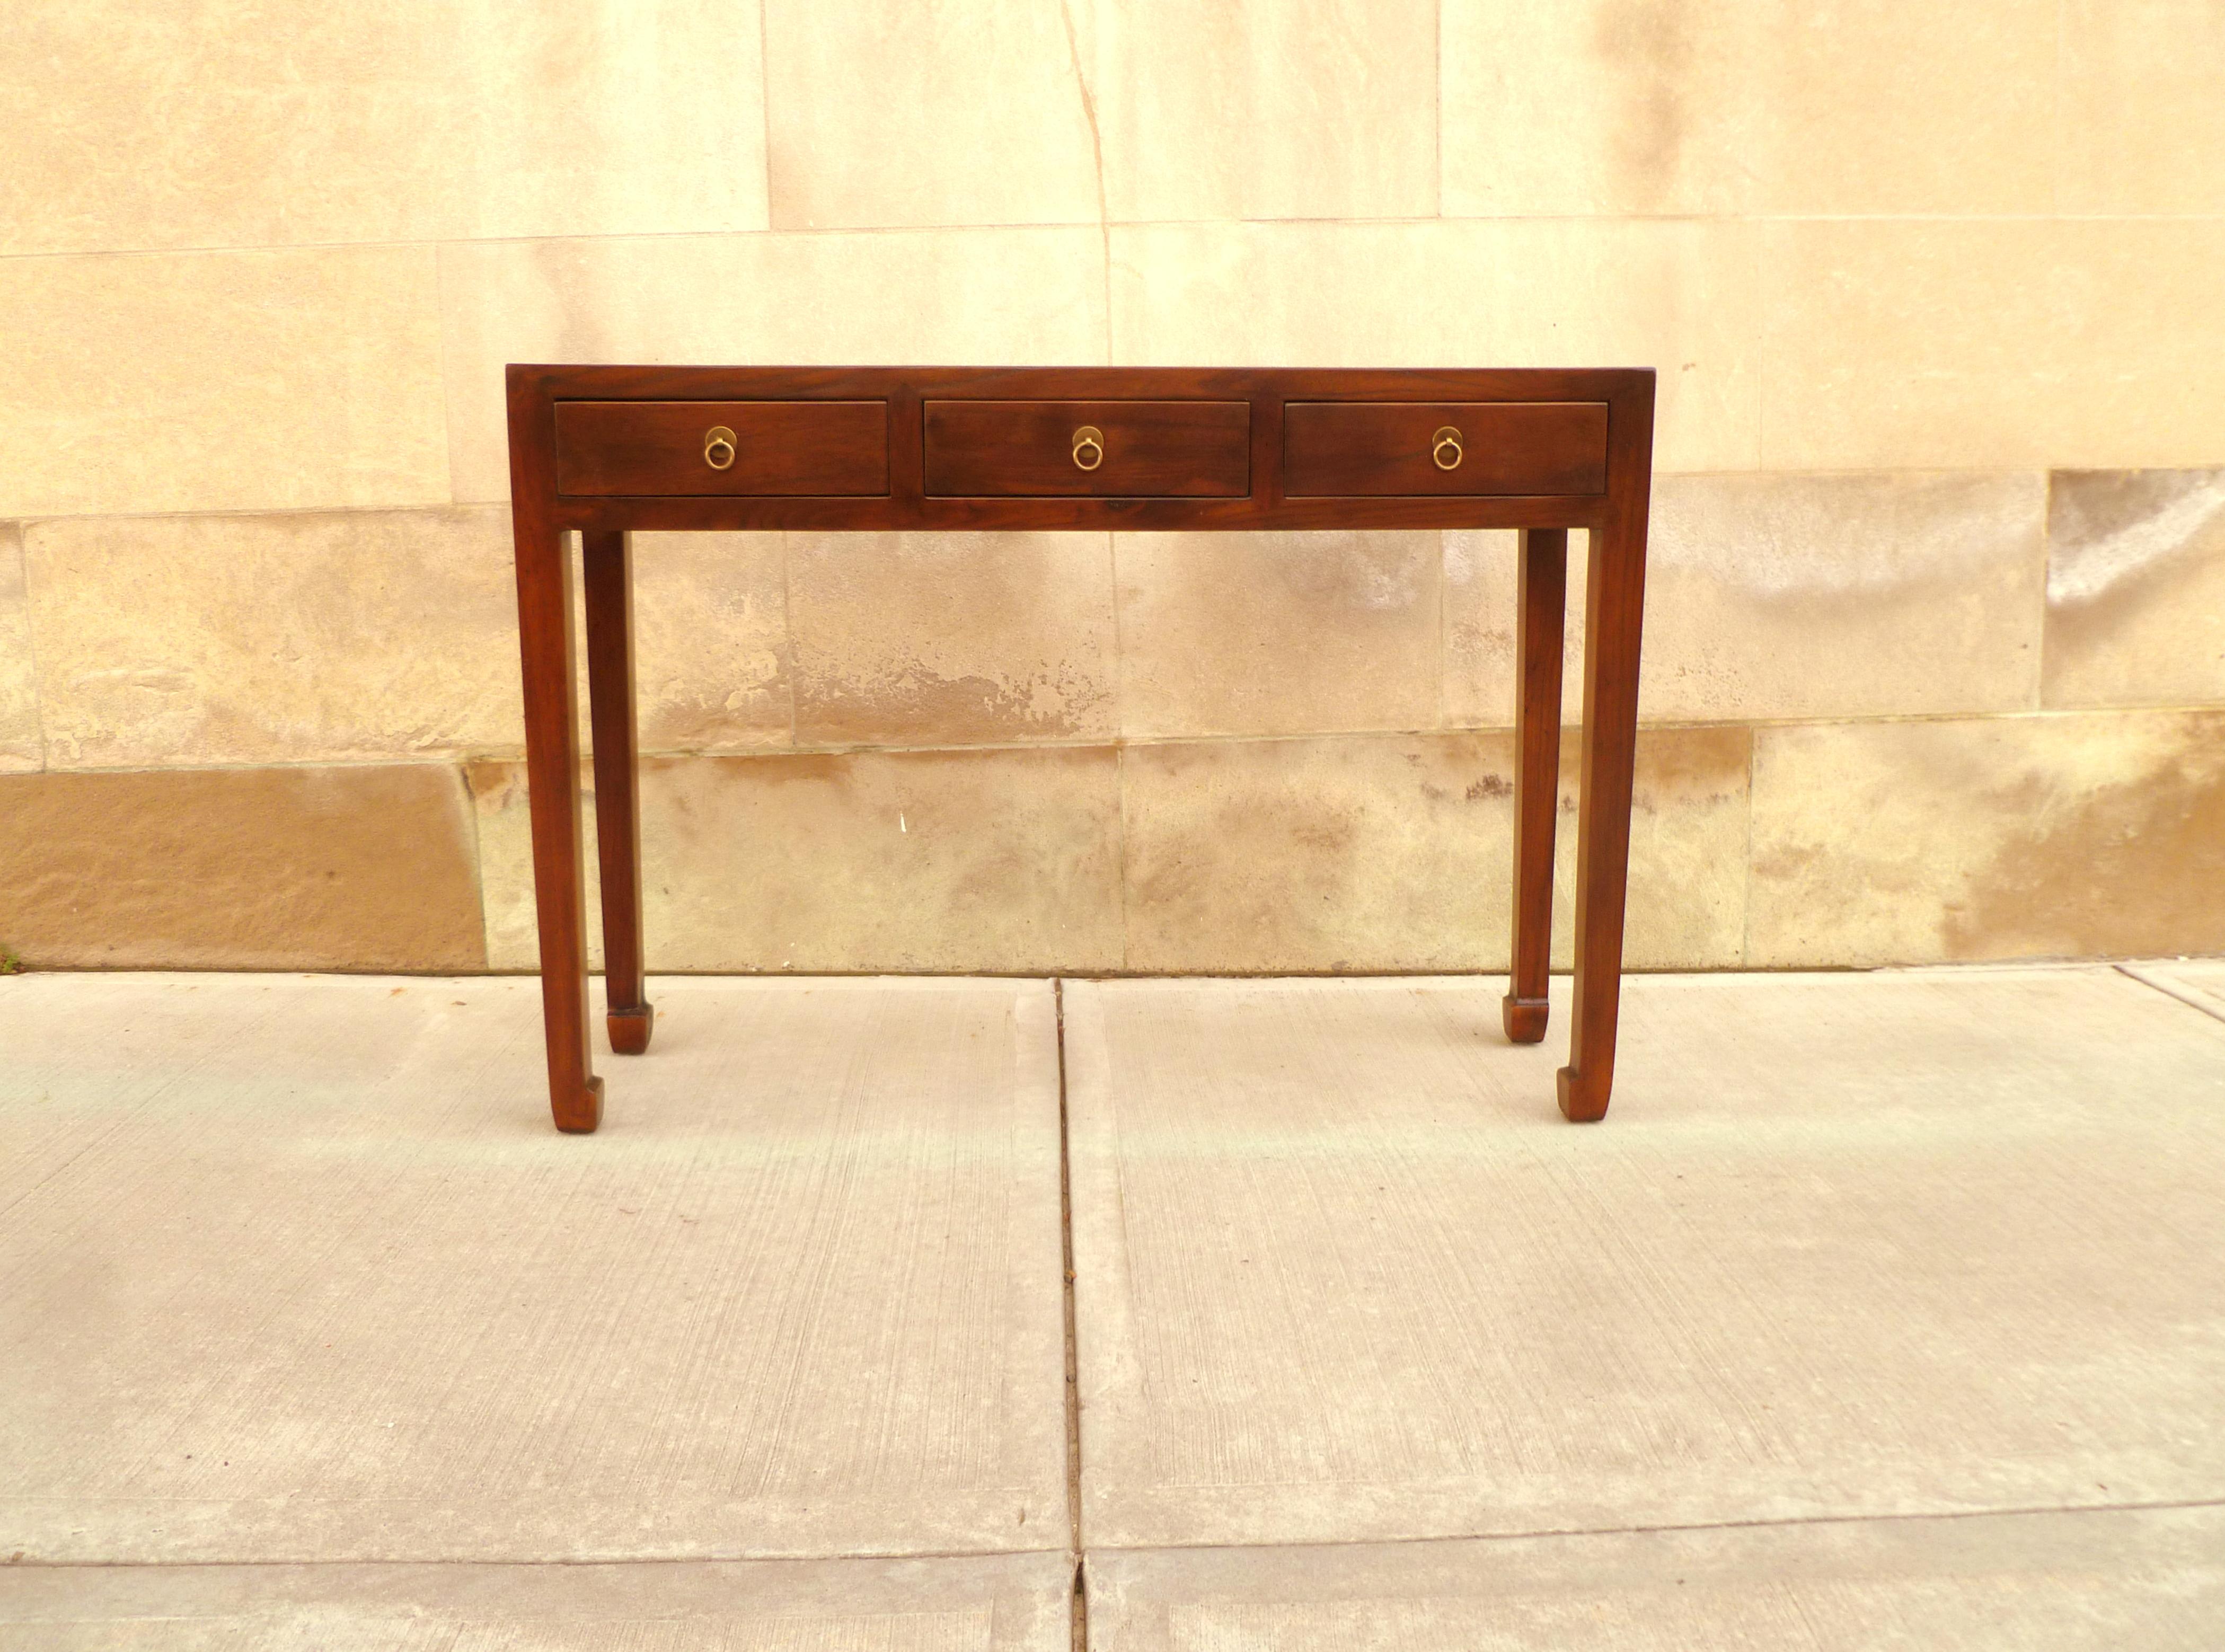 Fine Jumu console table with three drawers. Very elegant and fine quality. Beautiful color and simple form. We carry fine quality furniture with elegant finished and has been appeared many times in 